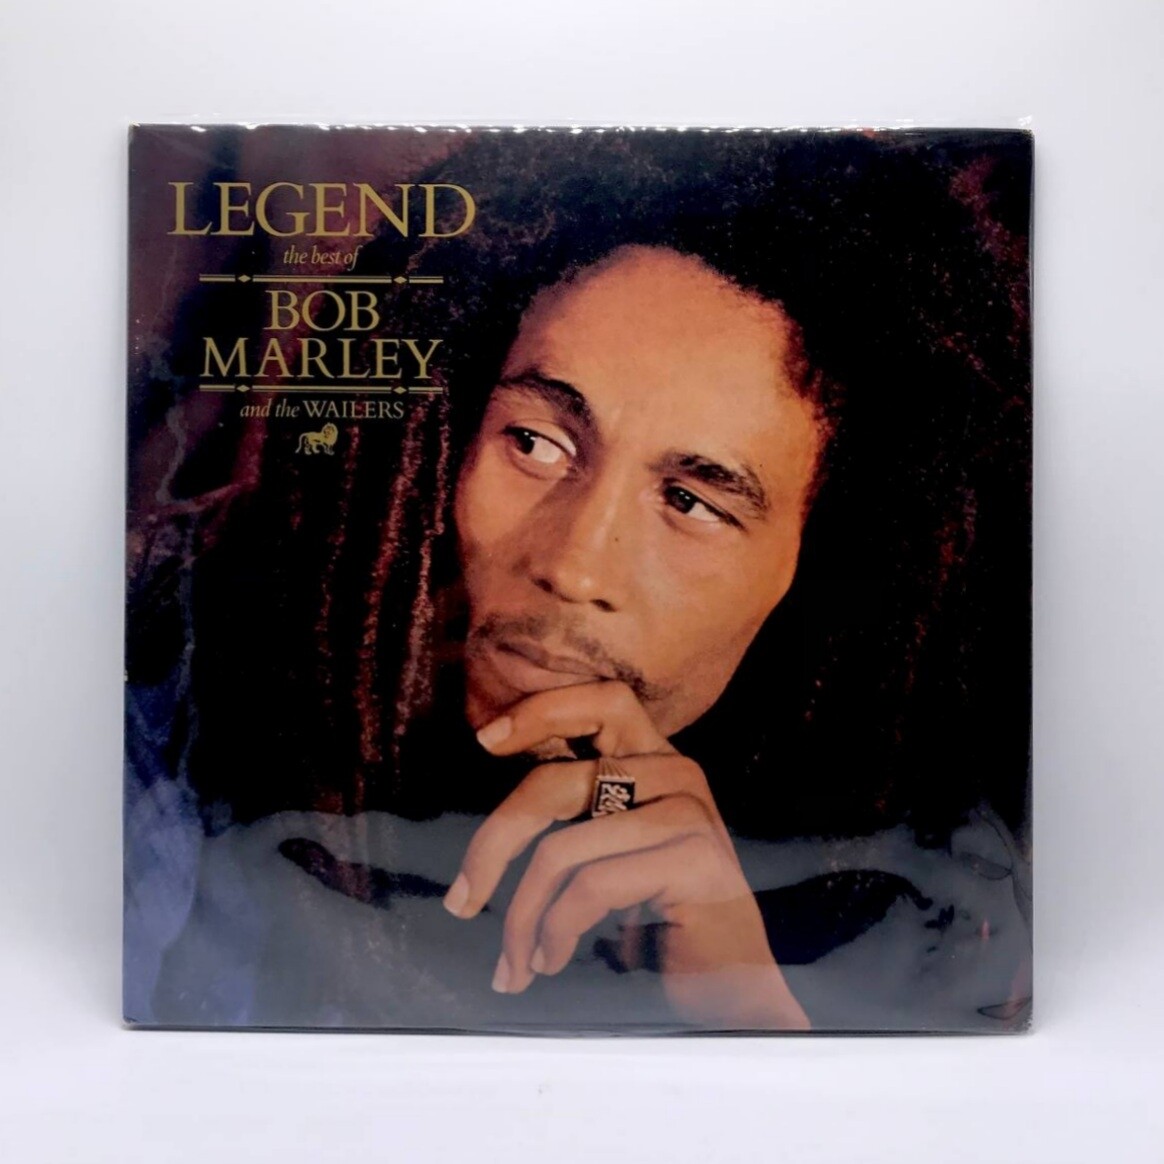 [USED] BOB MARLEY AND THE WAILERS -LEGEND: THE BEST OF- LP